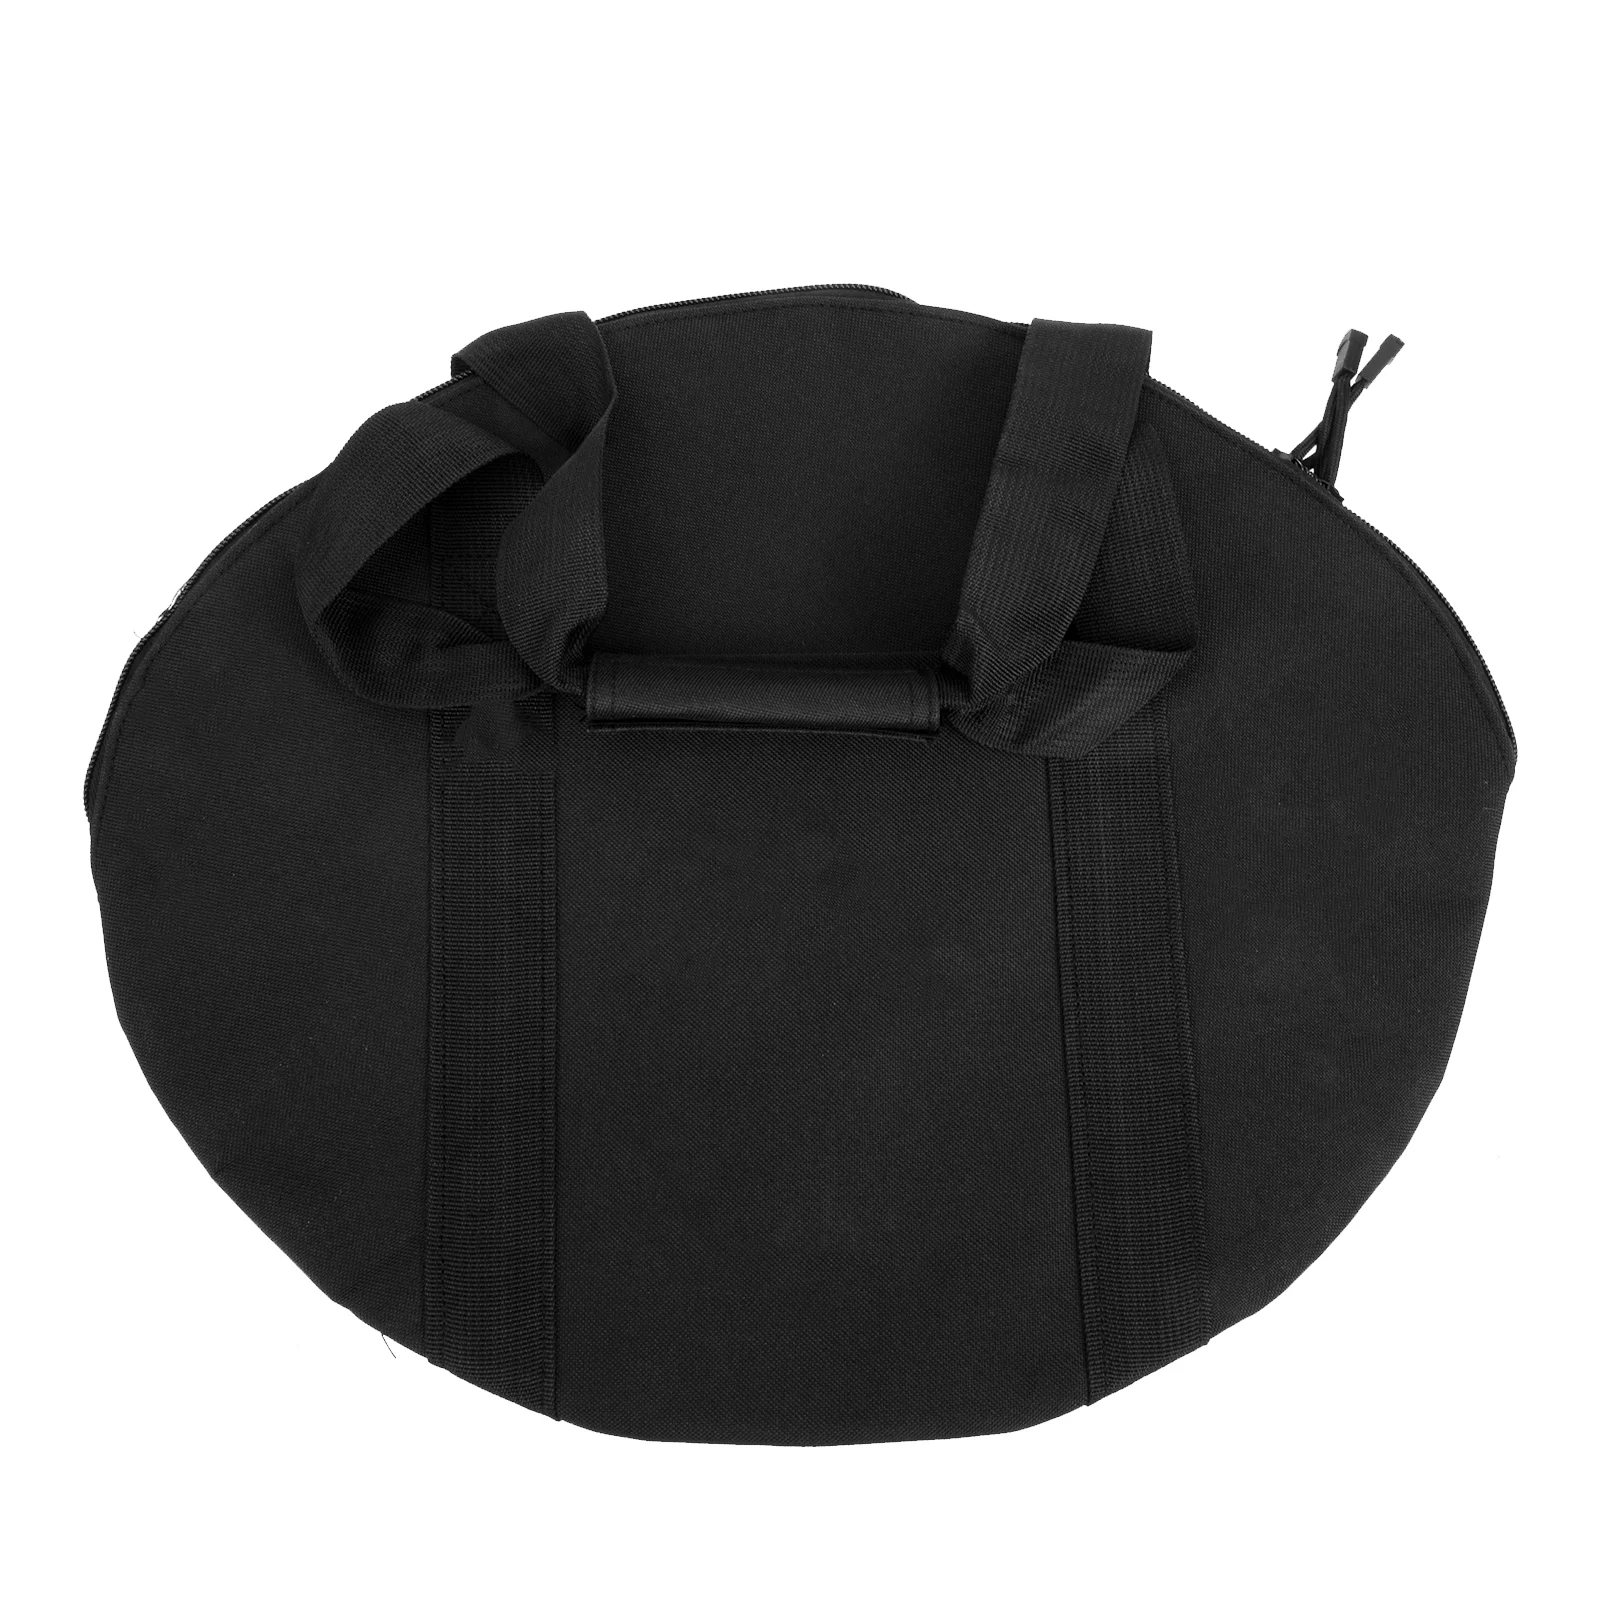 

Bag Pouch Storage Skillet Outdoor Pan Picnic Cookware Bakeware Camping Container Kitchenware Barbecue Charcoal Iron Cast Oxford